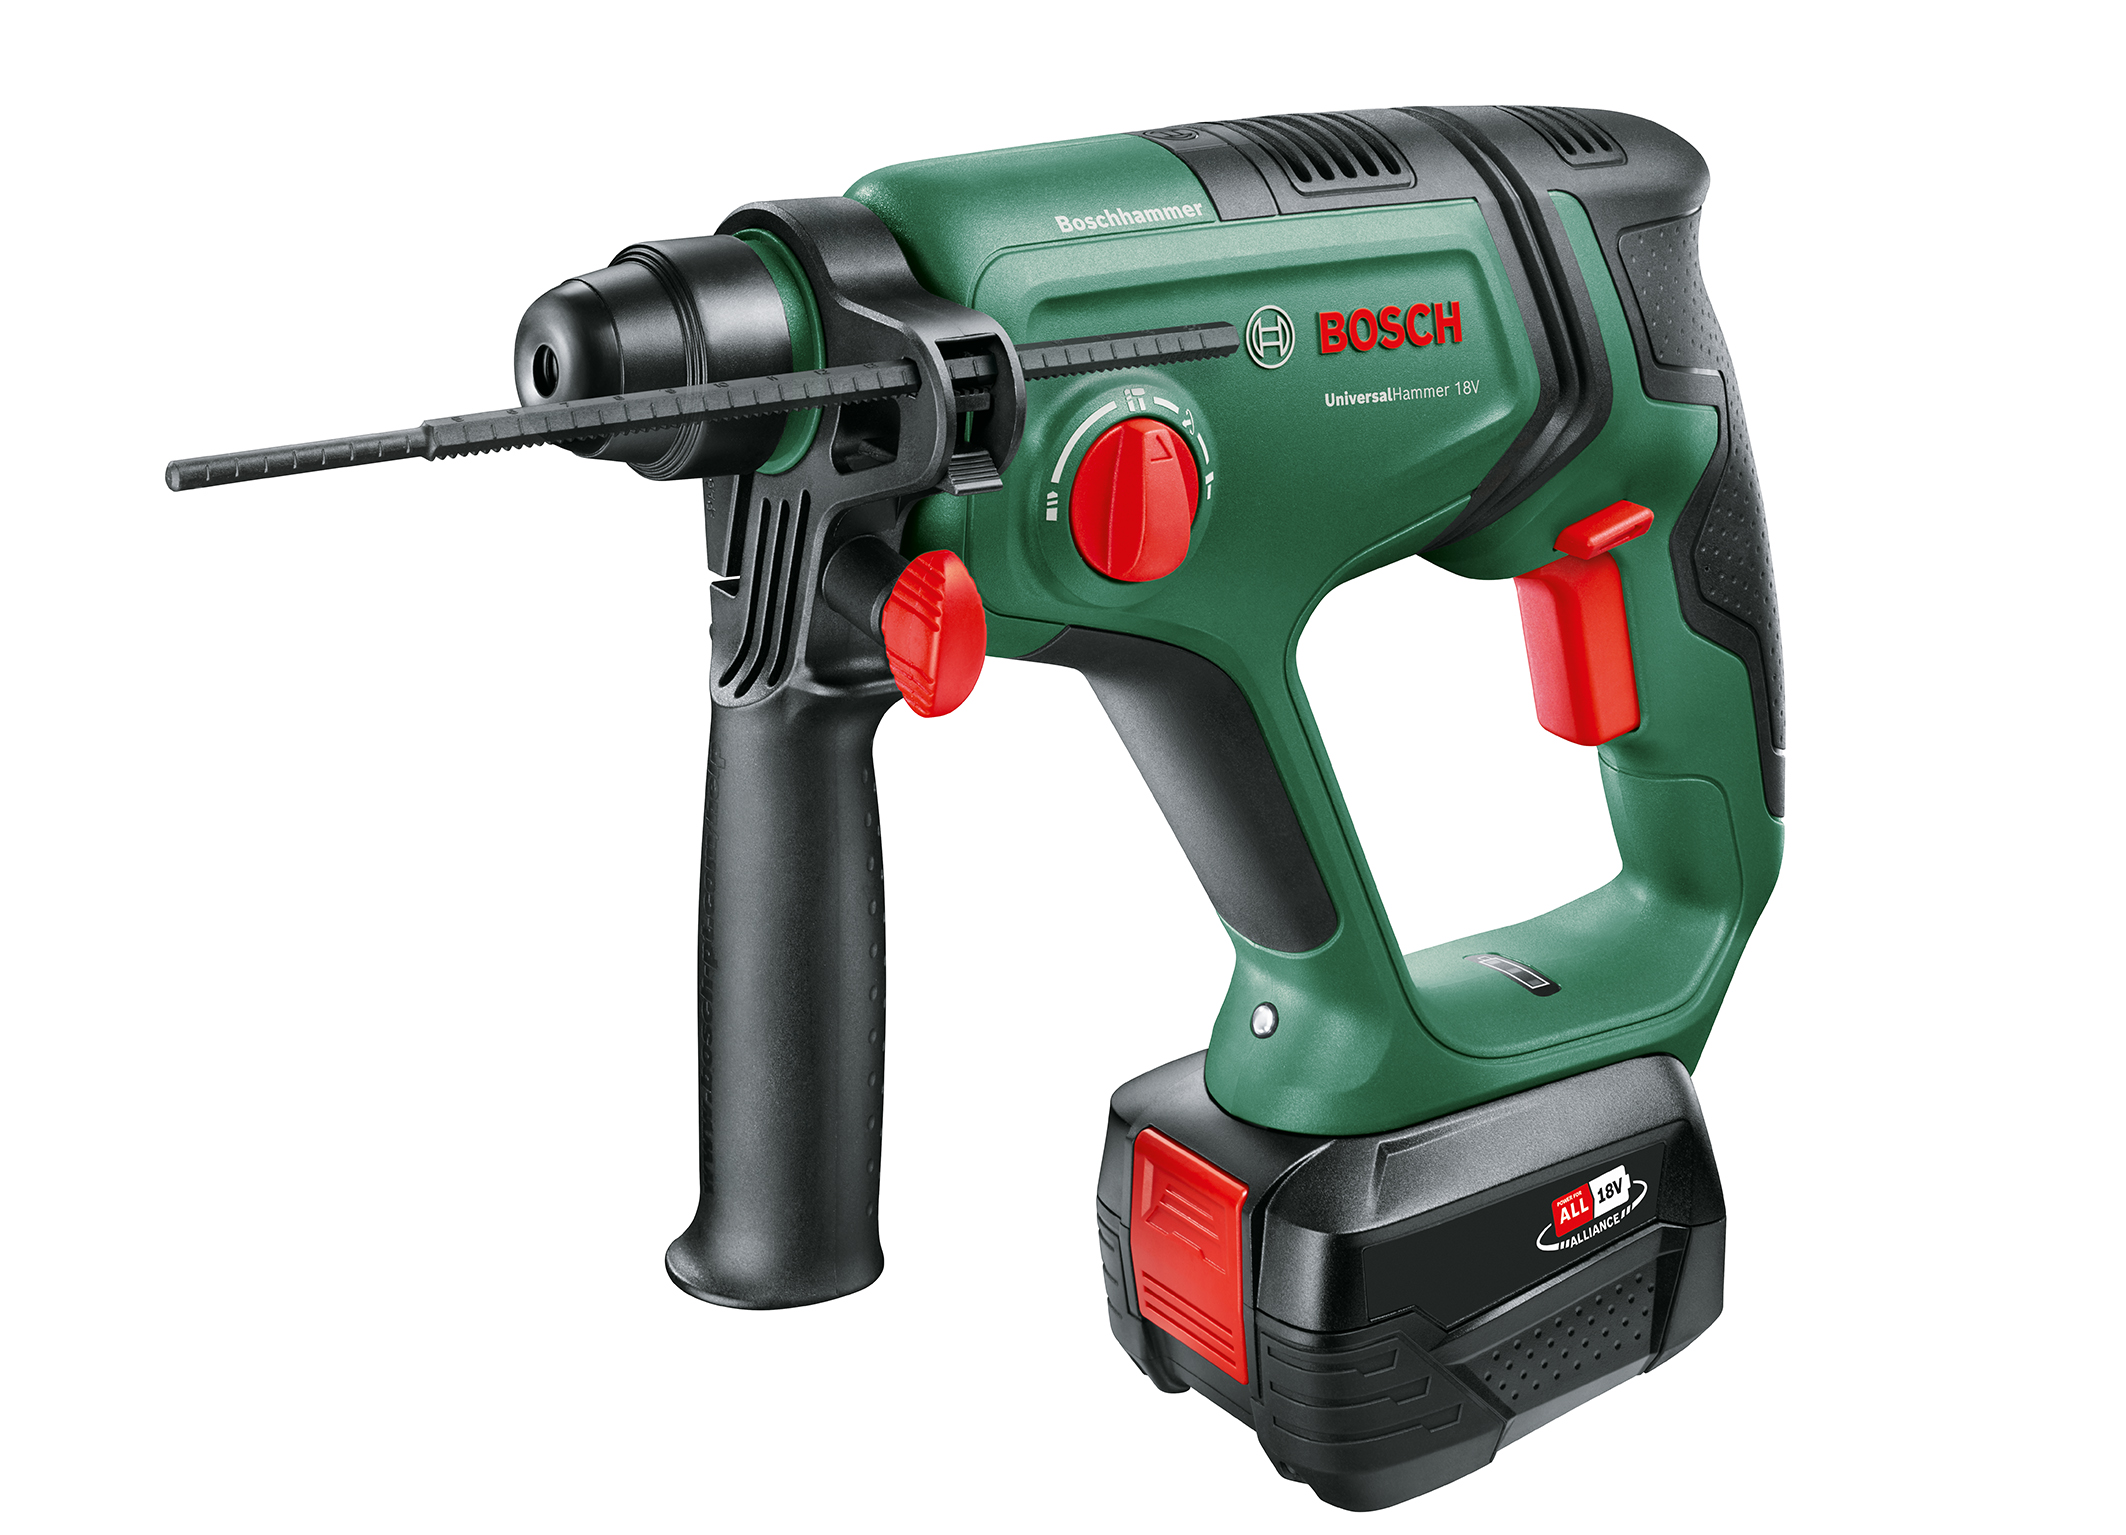 Strong addition to the "18V Power for All System": Cordless rotary hammer UniversalHammer 18V from Bosch for DIYers